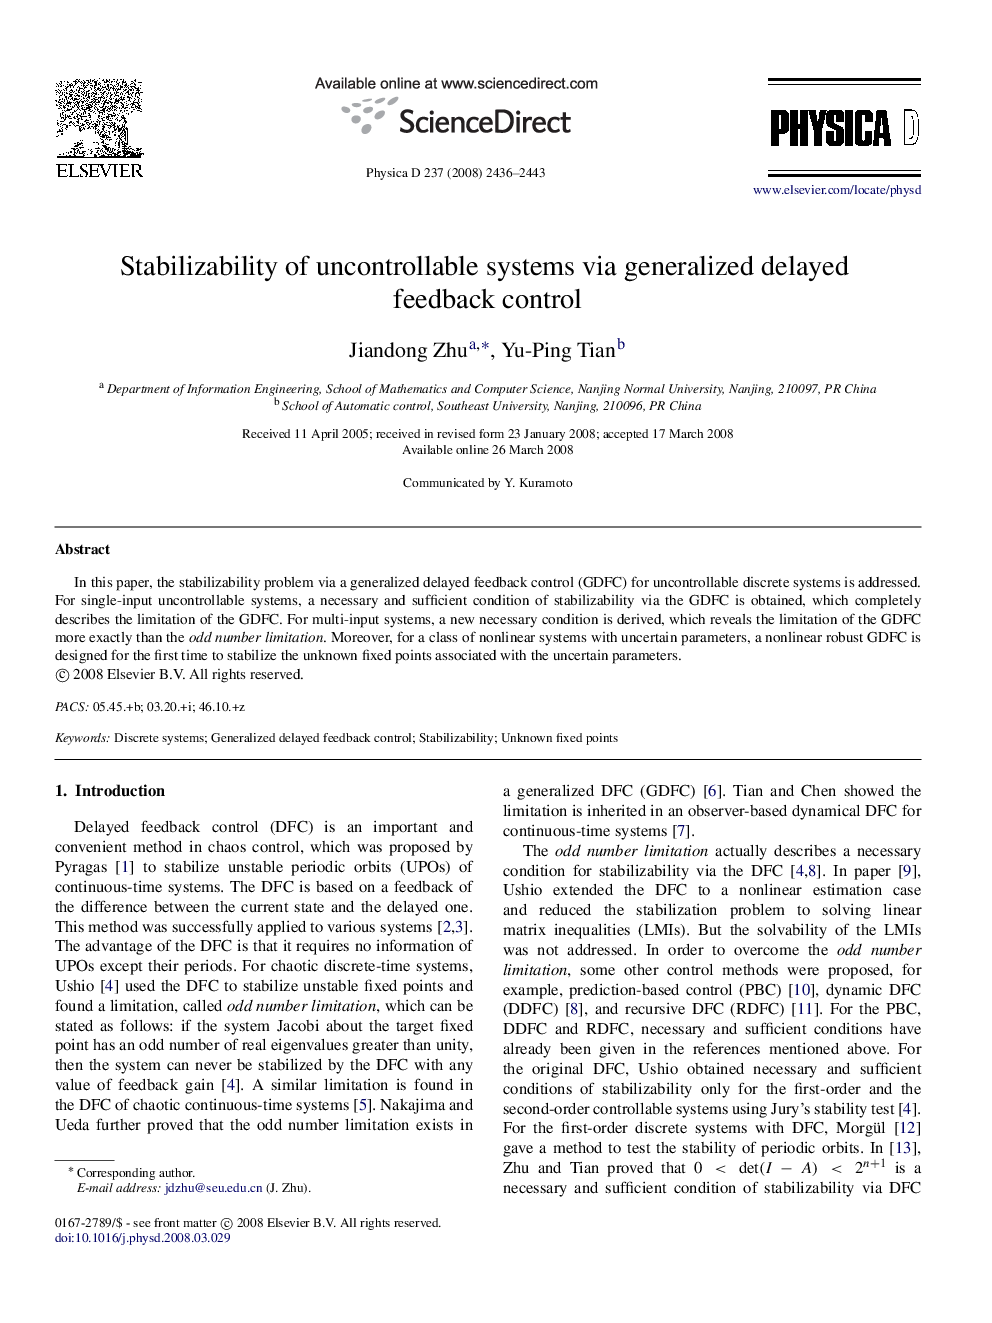 Stabilizability of uncontrollable systems via generalized delayed feedback control